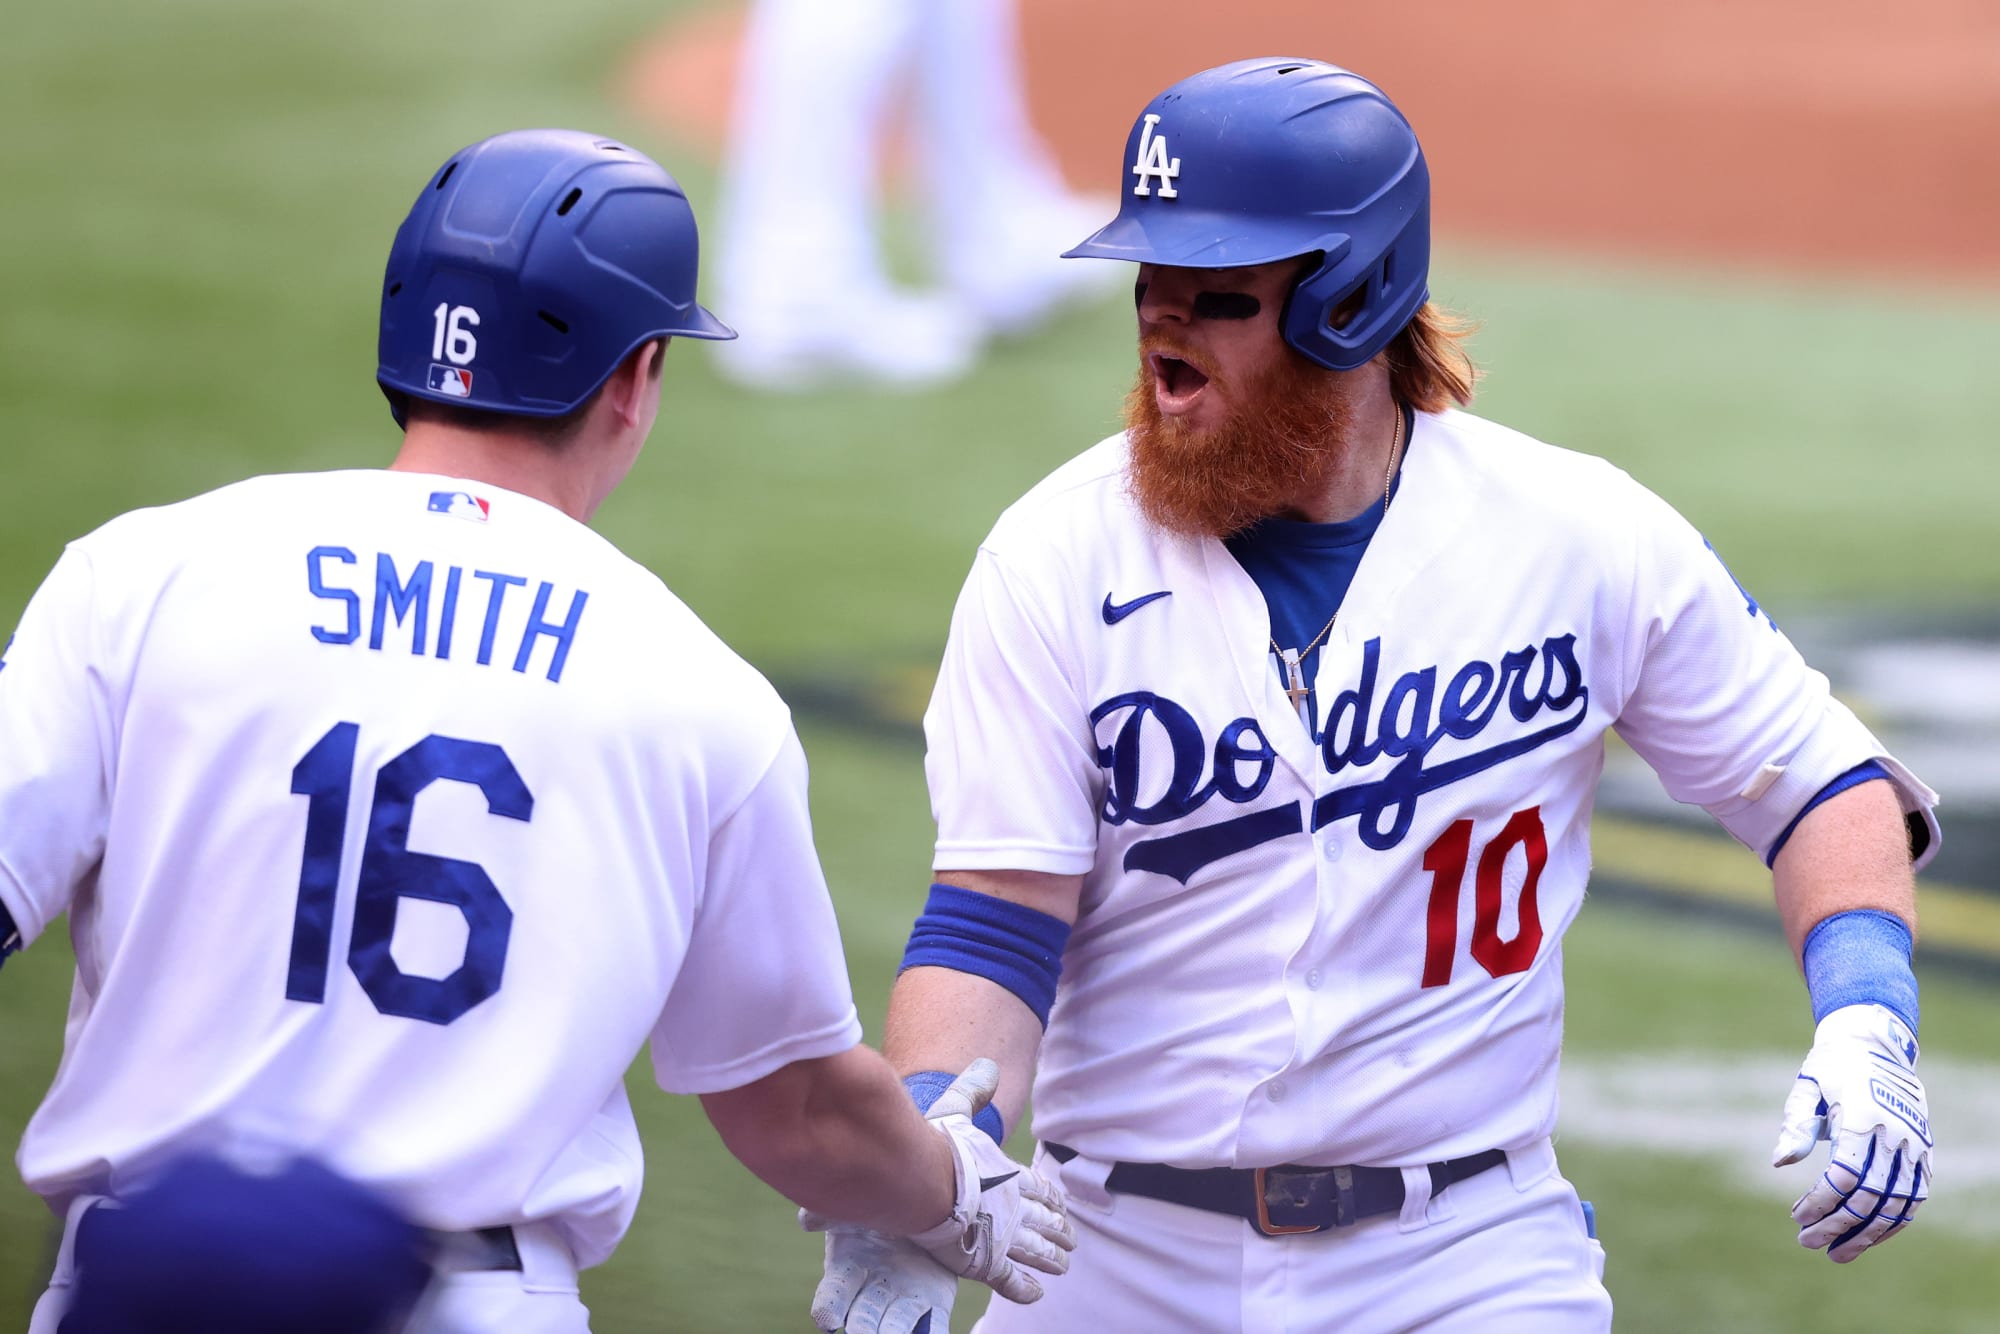 Comparing Dodgers and White Sox players on MLB Top 100 List